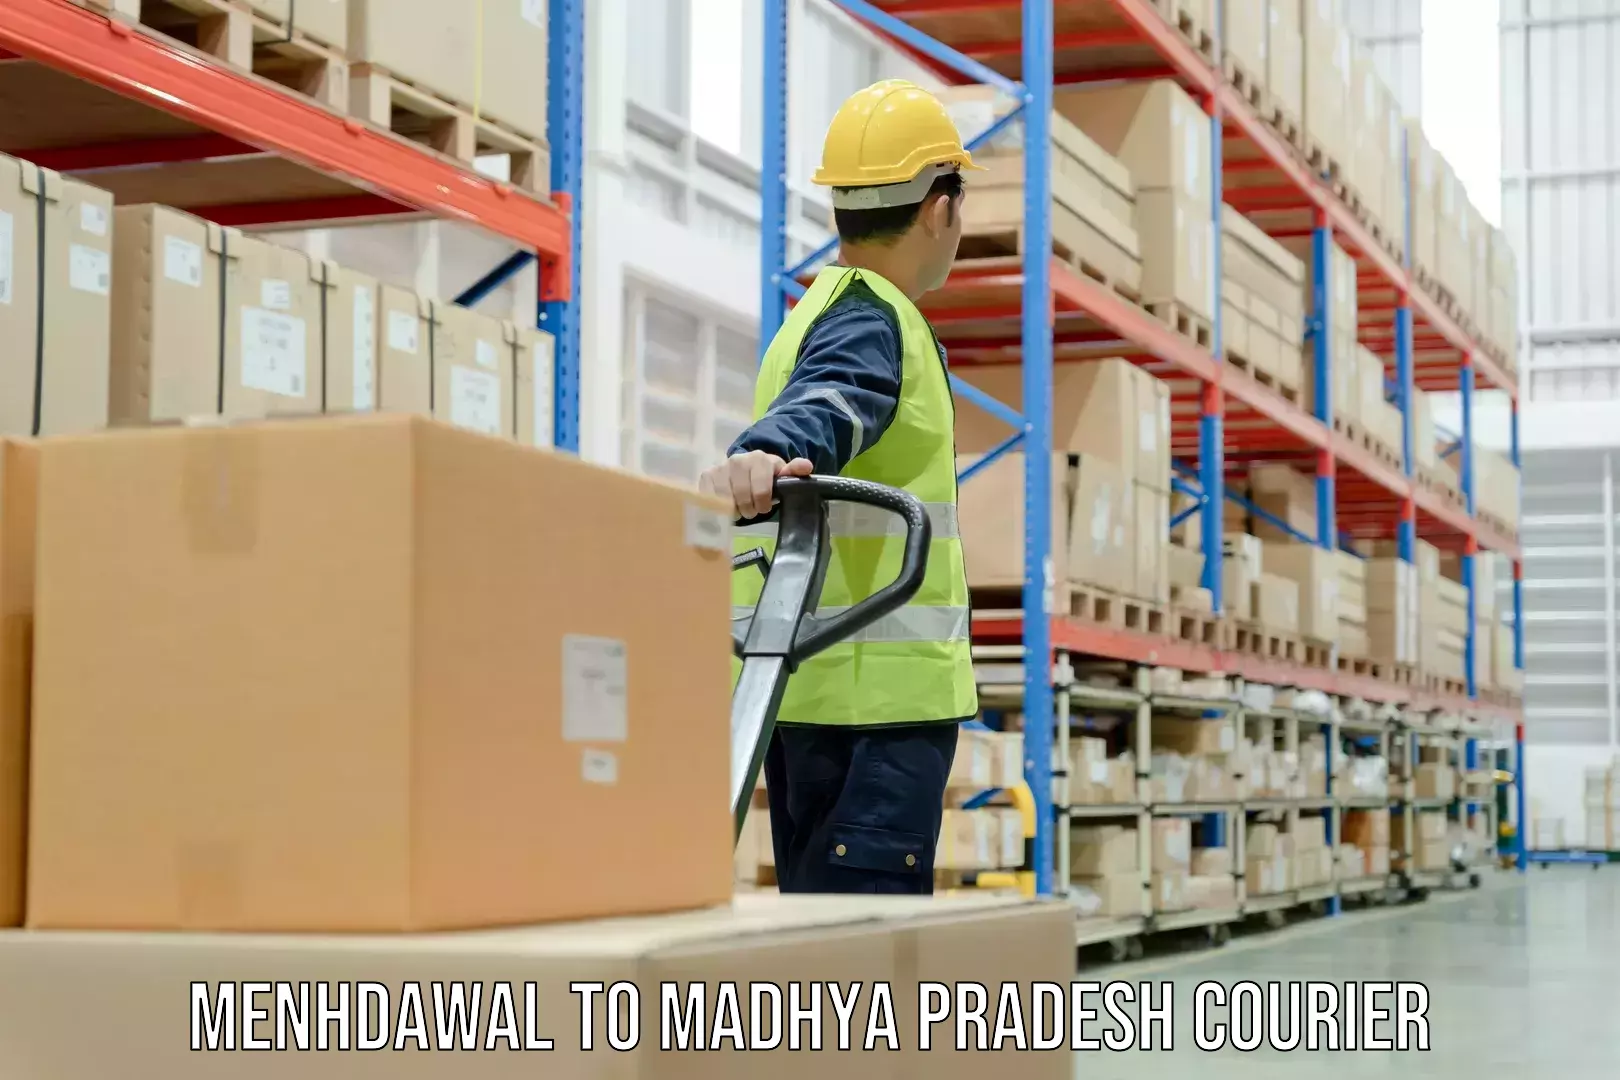 Courier service innovation Menhdawal to Udaipura